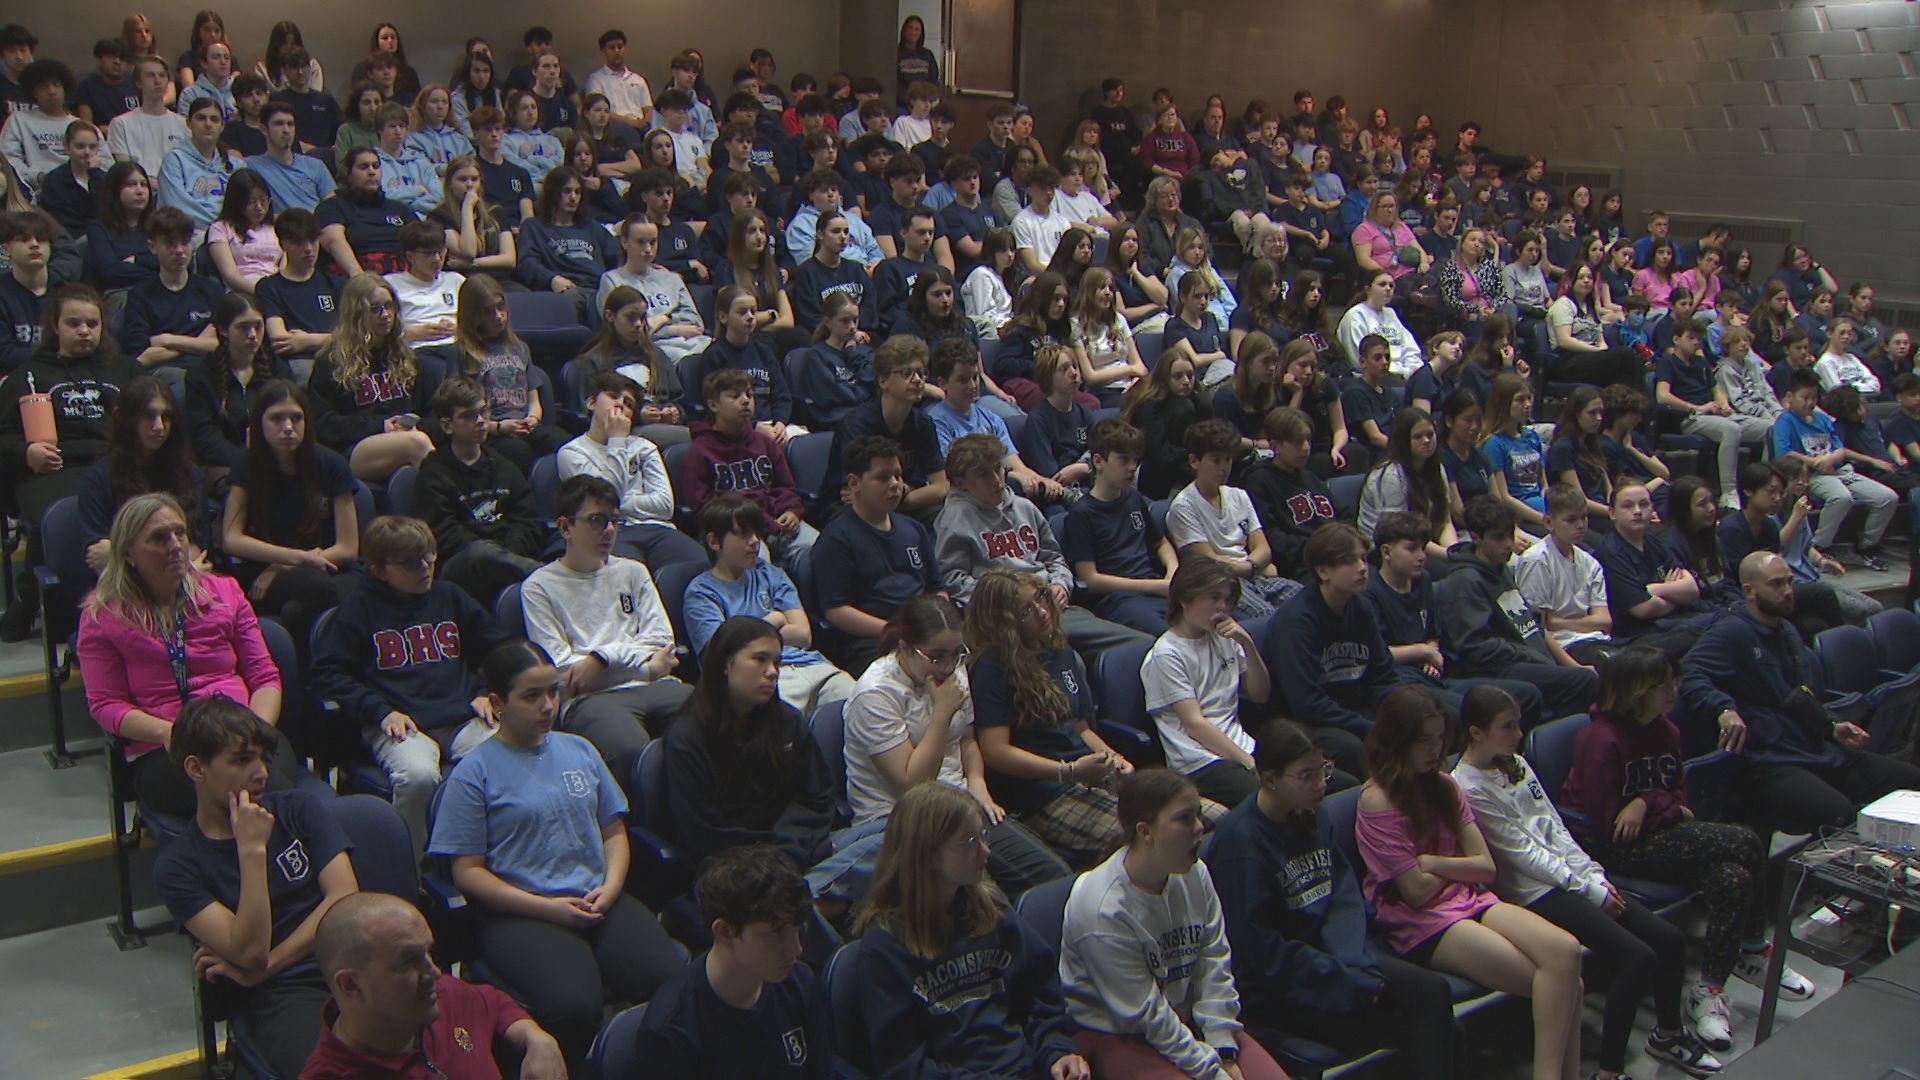 Montreal students acknowledged for Terry Fox Run fundraising efforts